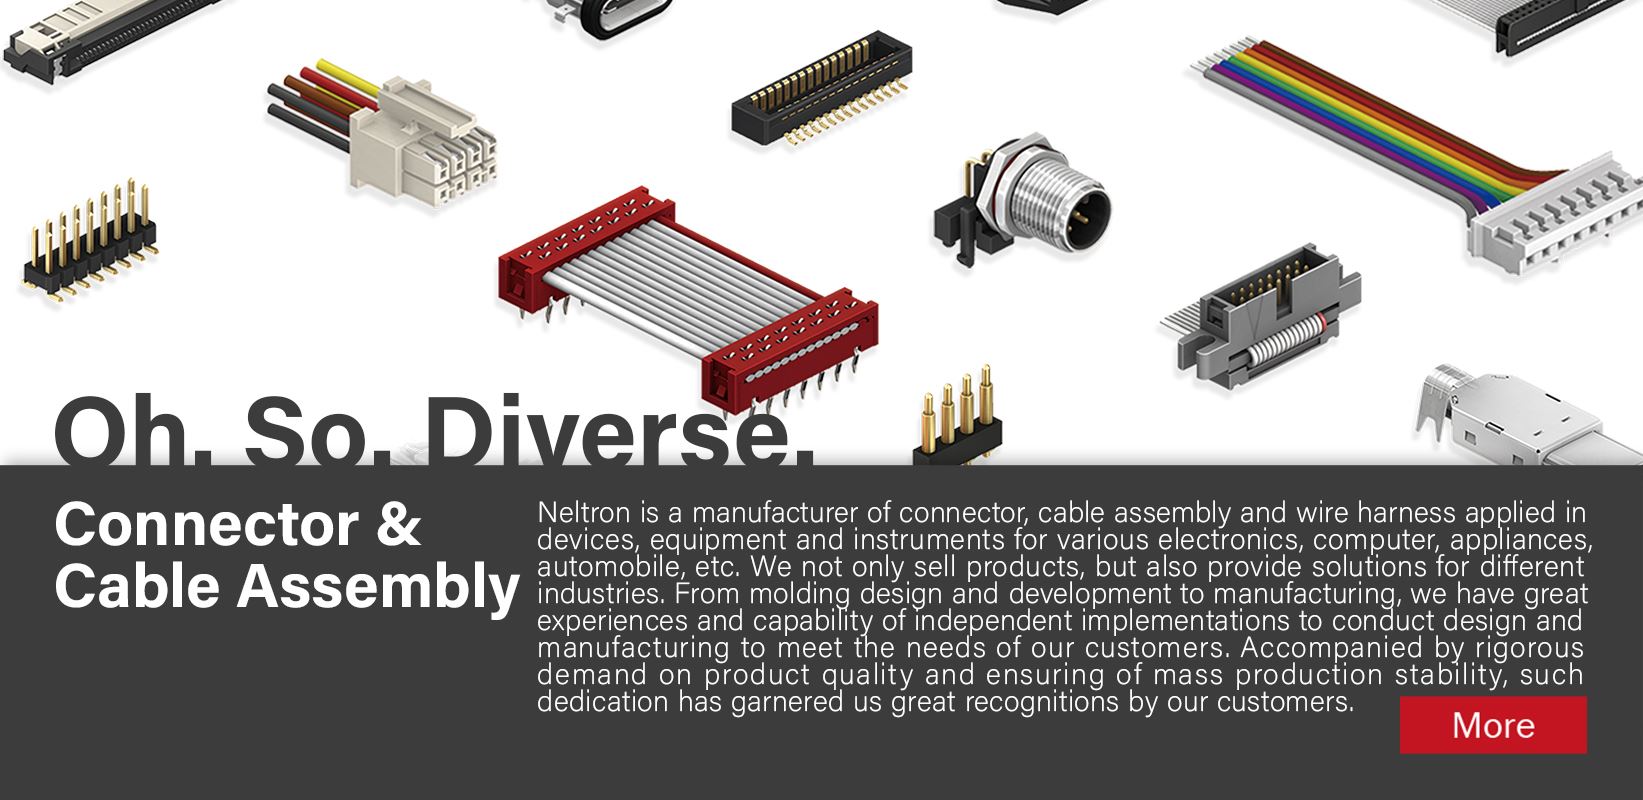 Oh. So. Diverse. Connector & Cable Assembly